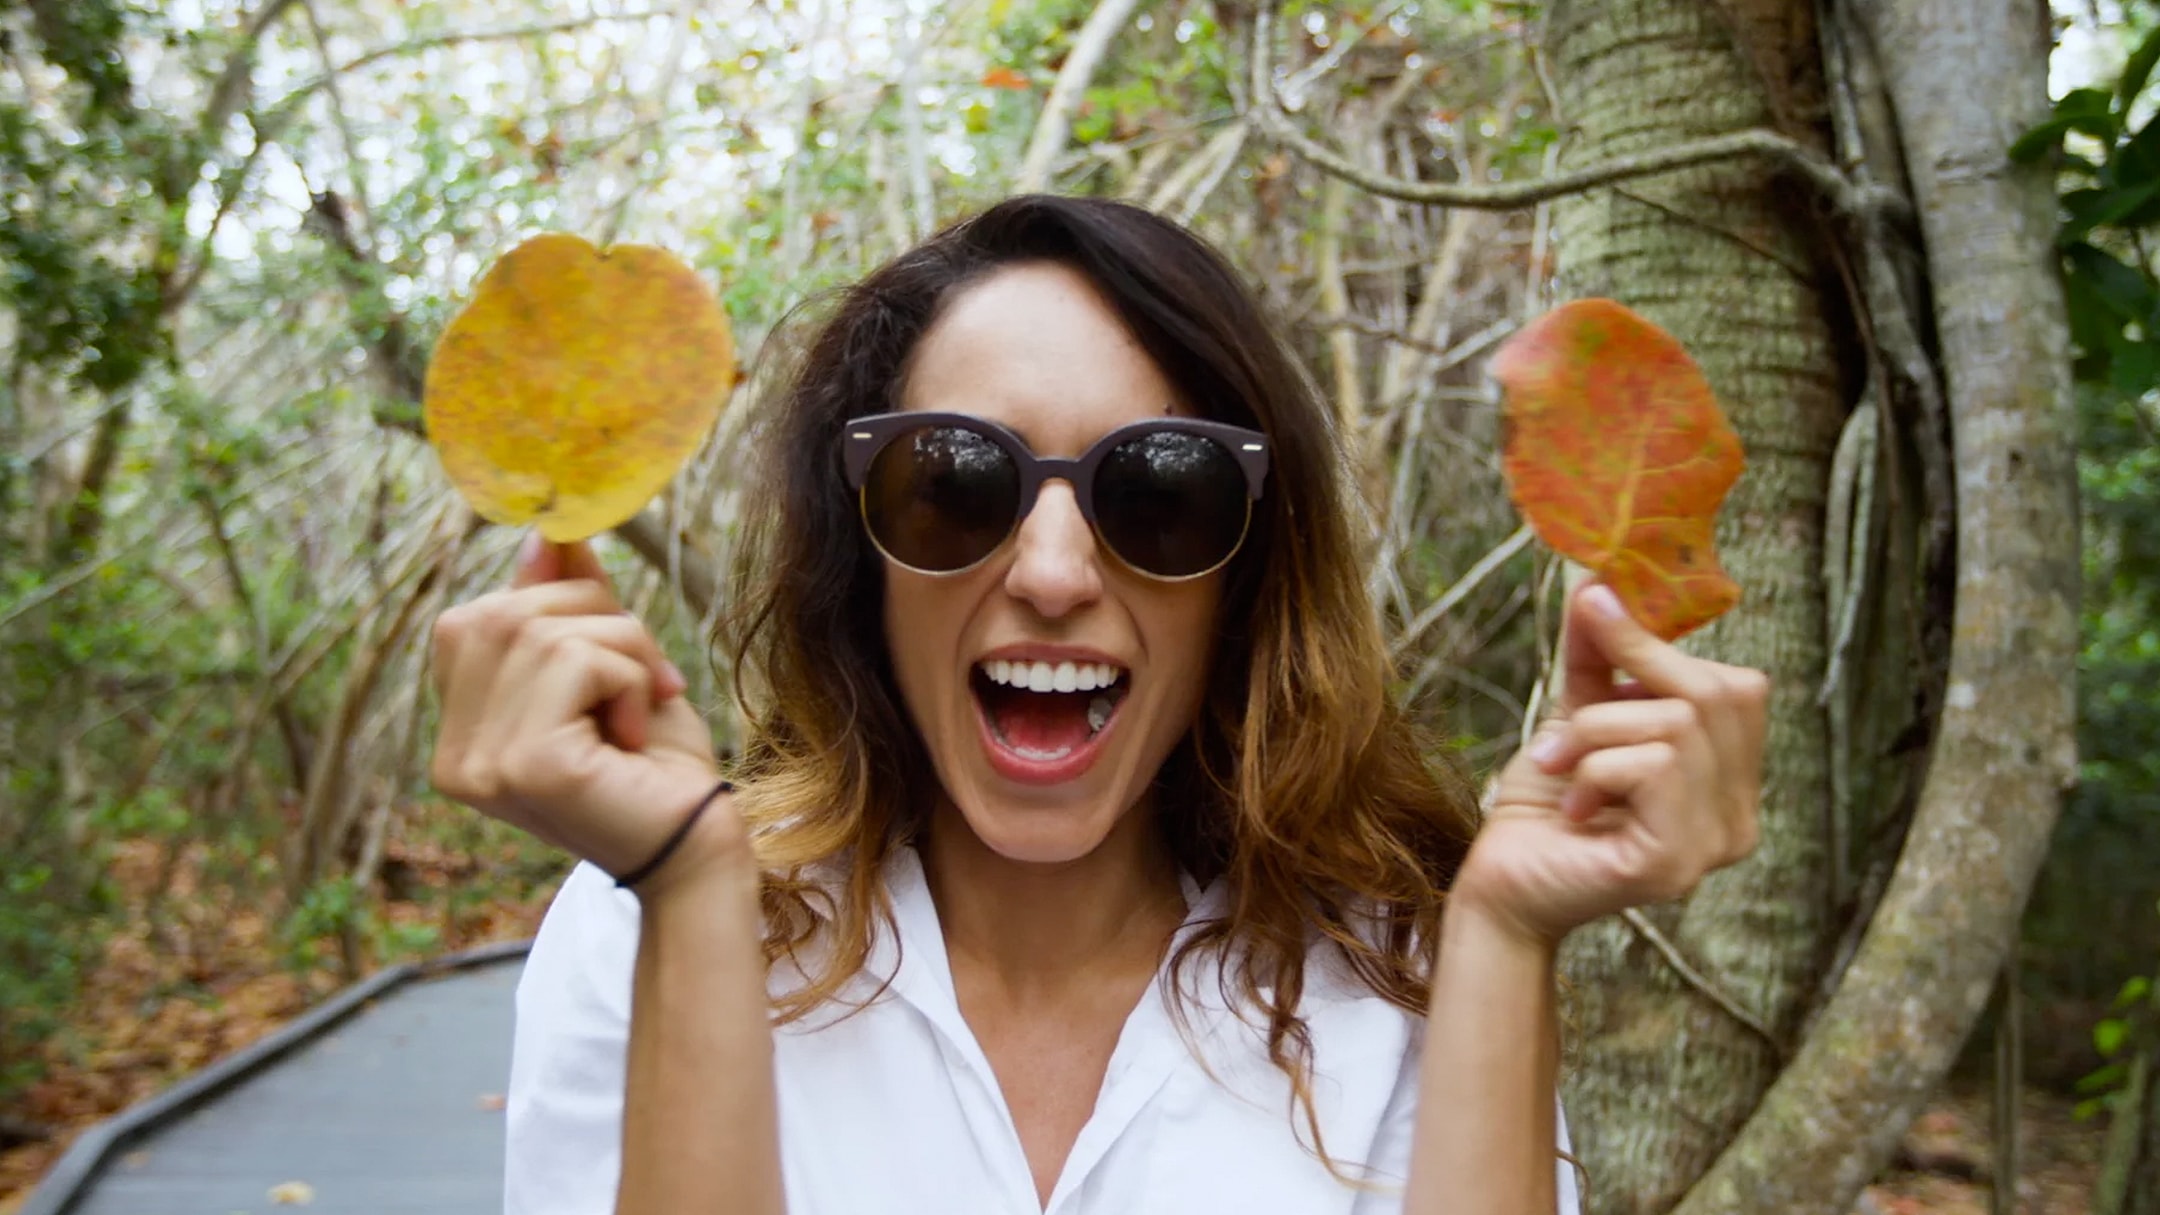 Woman screams with two leaves - a still taken from an influencer marketing video.